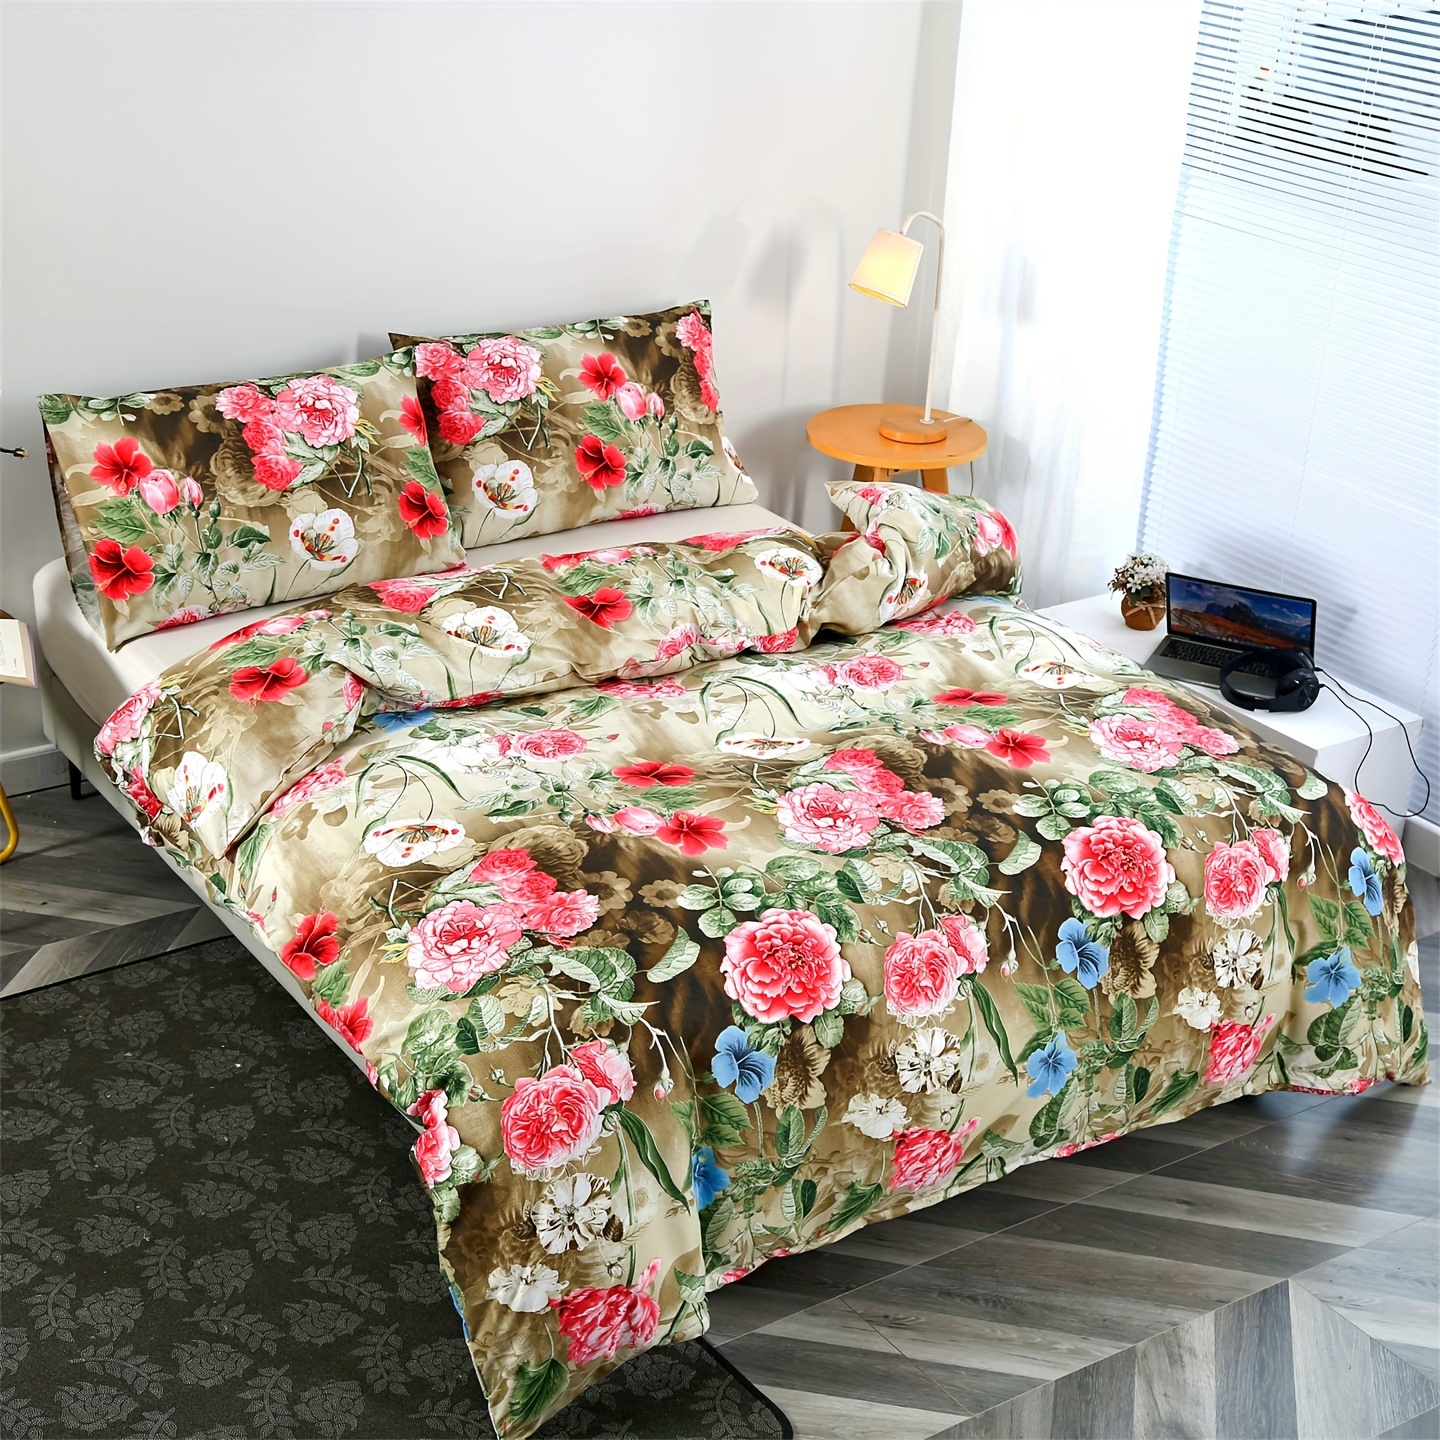 

Floral Duvet Cover Set - Breathable All-season Polyester Bedding With Zipper Closure, Includes 2 Pillowcases, Machine Washable, Flower Pattern, No Duvet Insert - Ideal For Bedroom And Guest Room